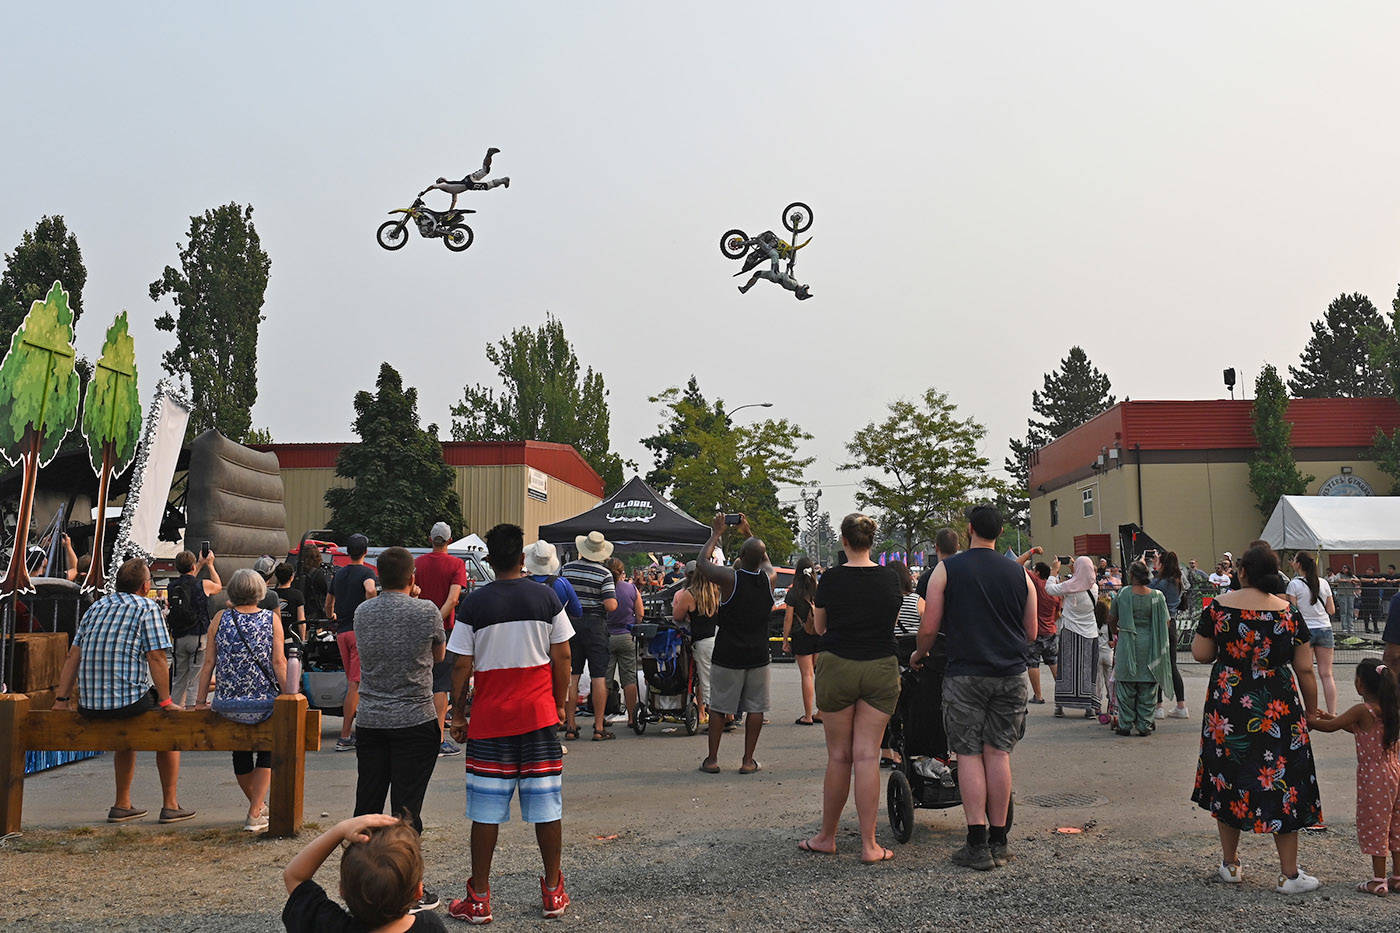 Motocross riders with Global FMX from Kelowna, B.C. do mid-air stunts during the Abbotsford Agrifair on Sunday, Aug. 1, 2021. (Jenna Hauck/ Black Press)